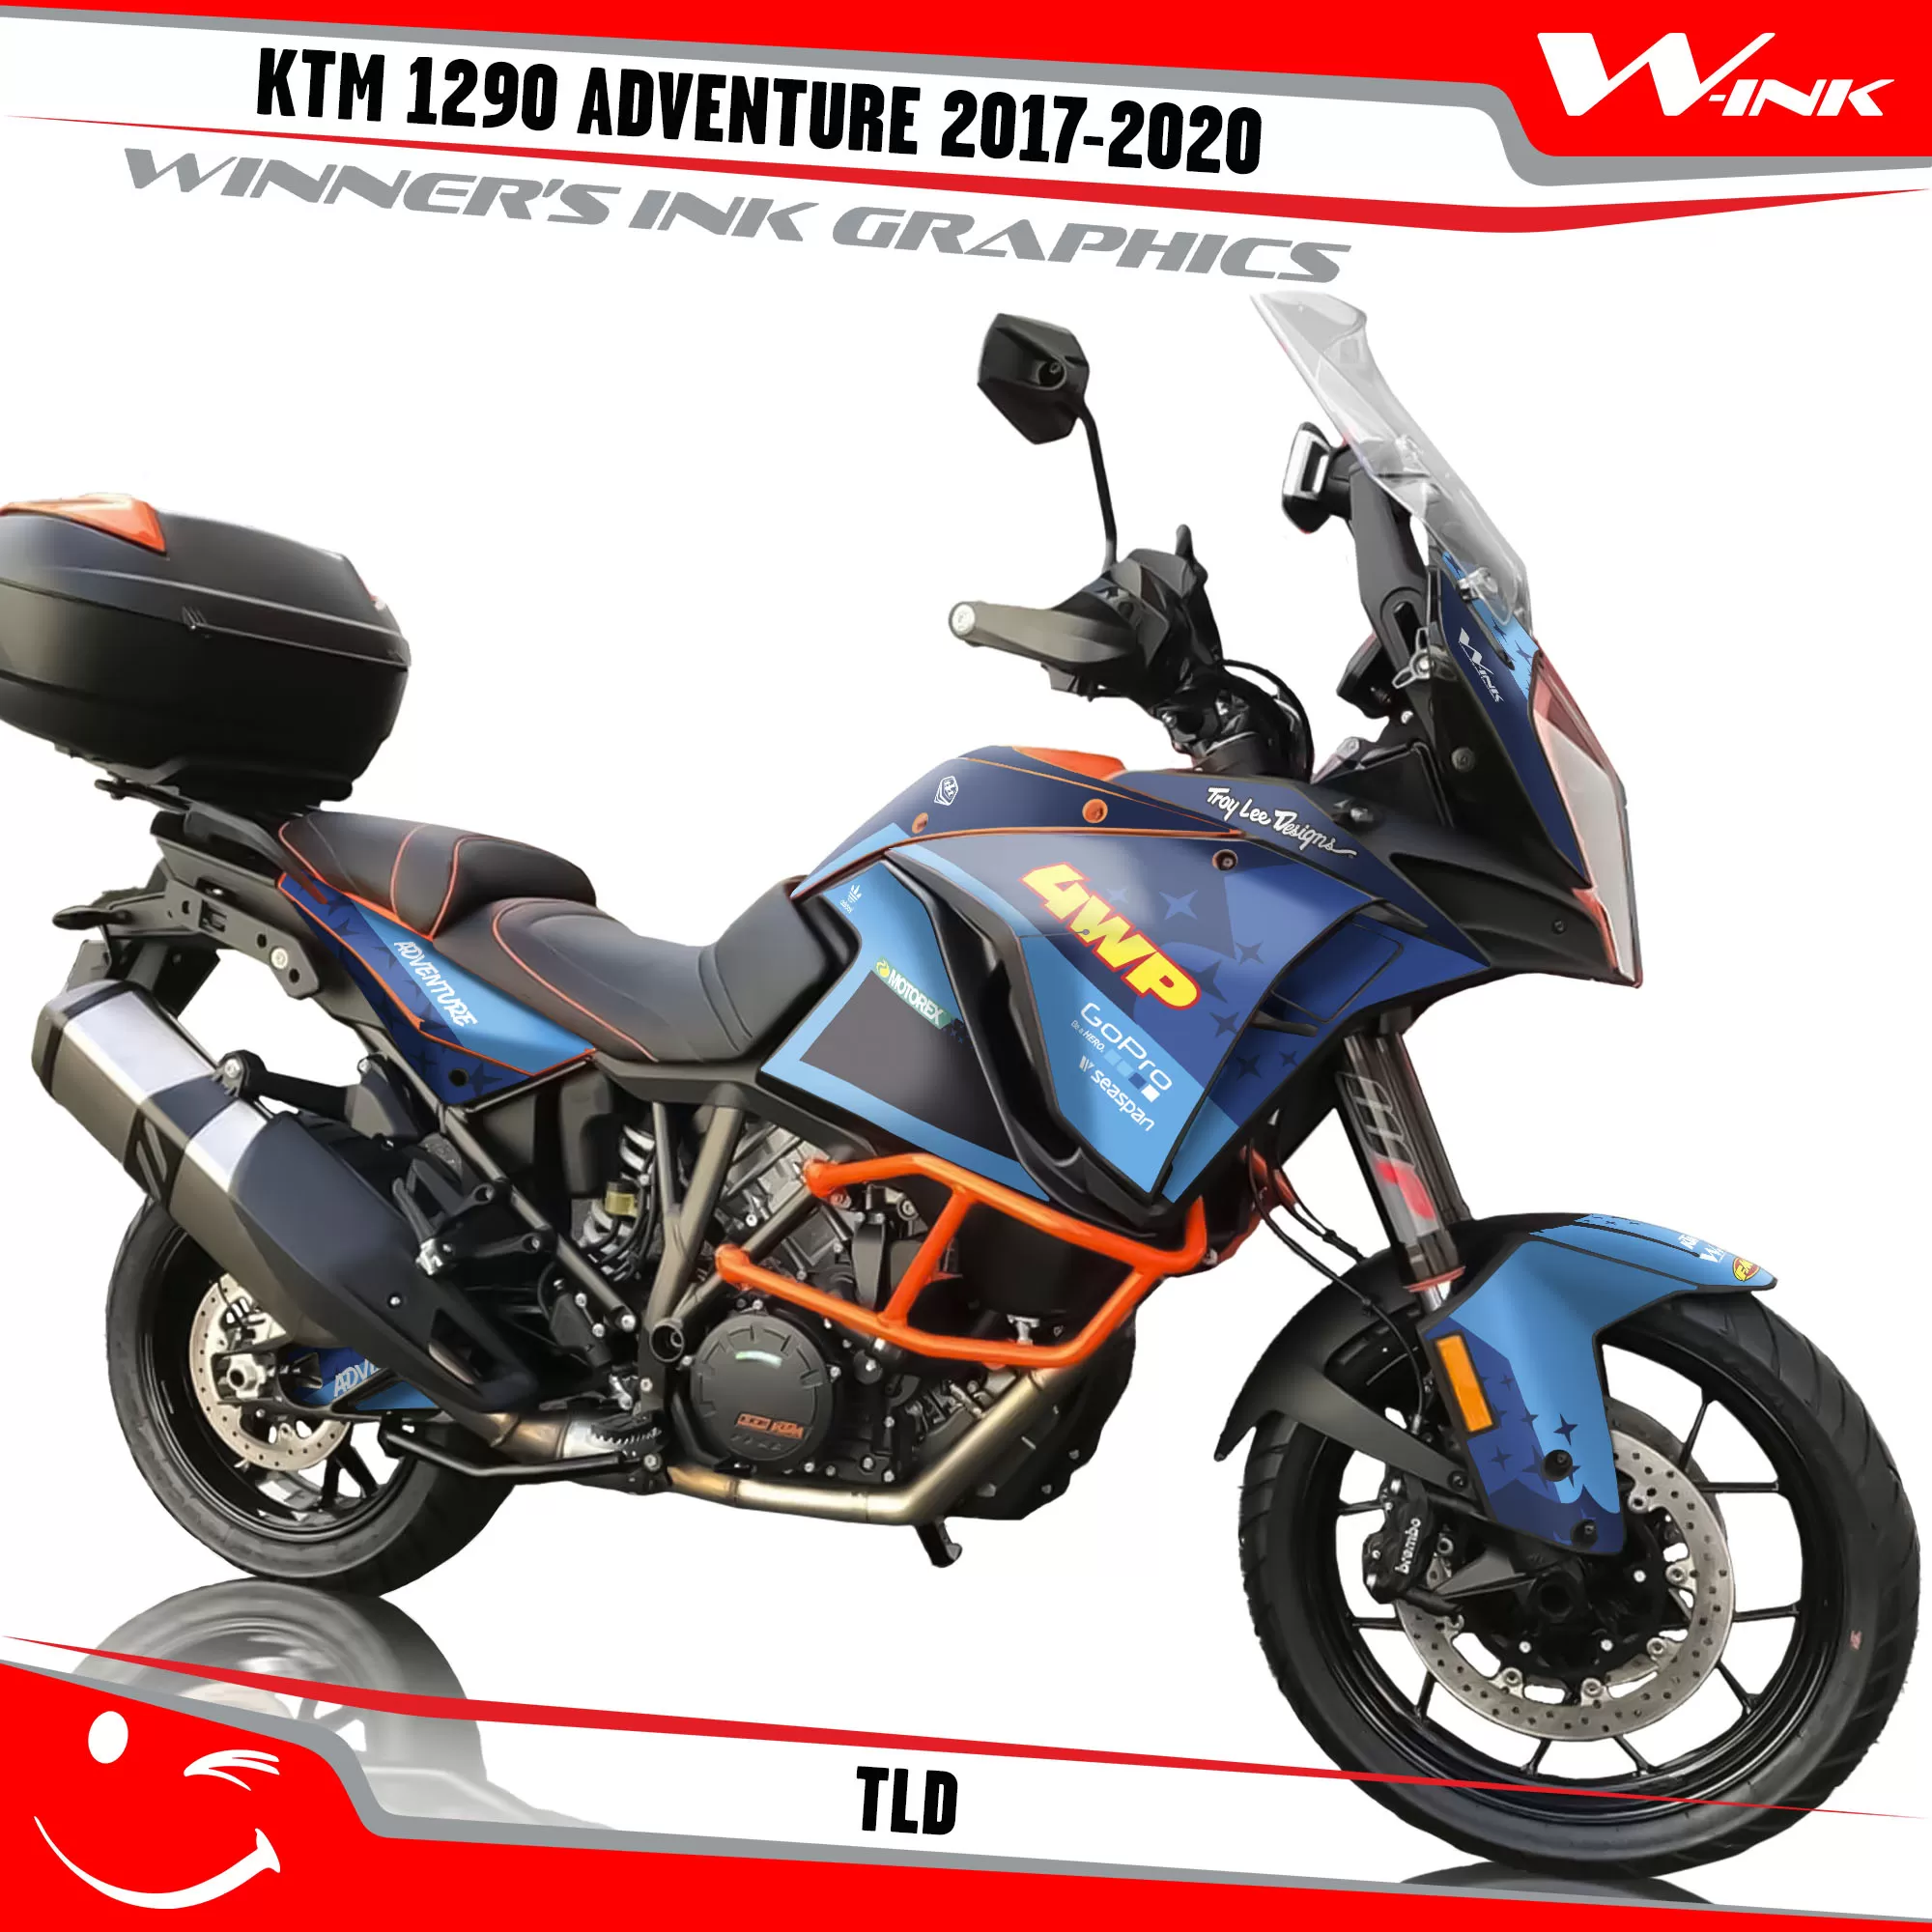 KTM-Adventure-1290-2017-2018-2019-2020-graphics-kit-and-decals-TLD